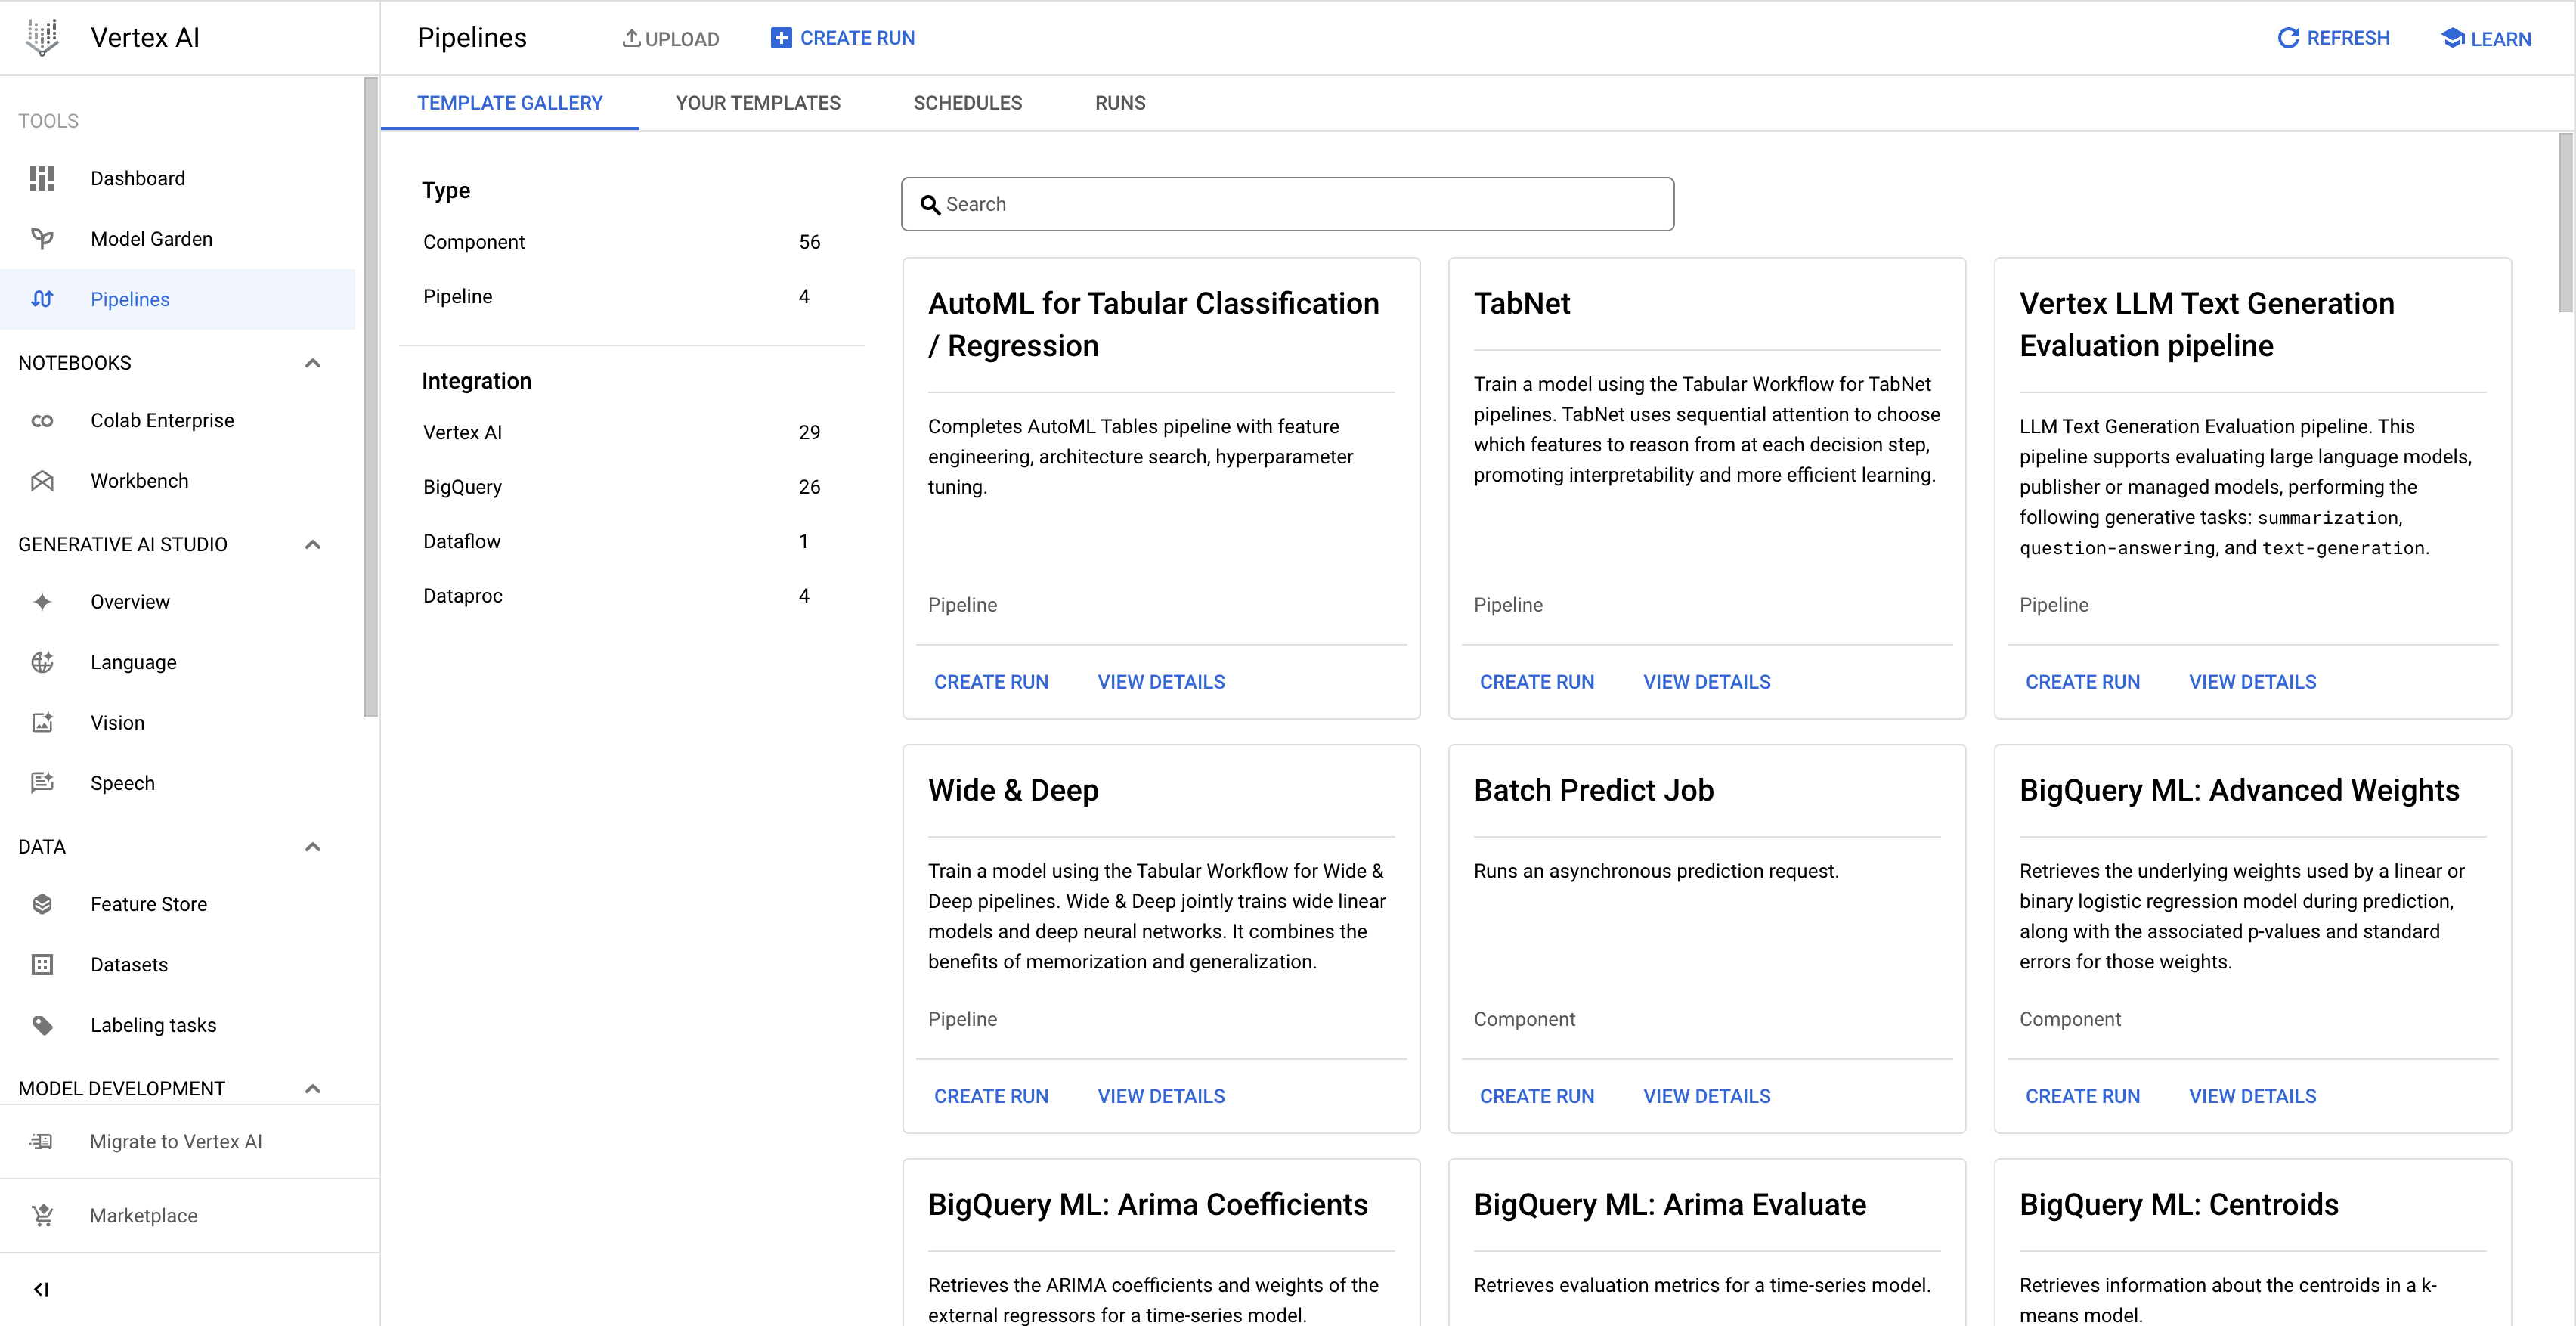 Shows the Template Gallery page containing Google-authored pipeline templates for Tabular Workflows